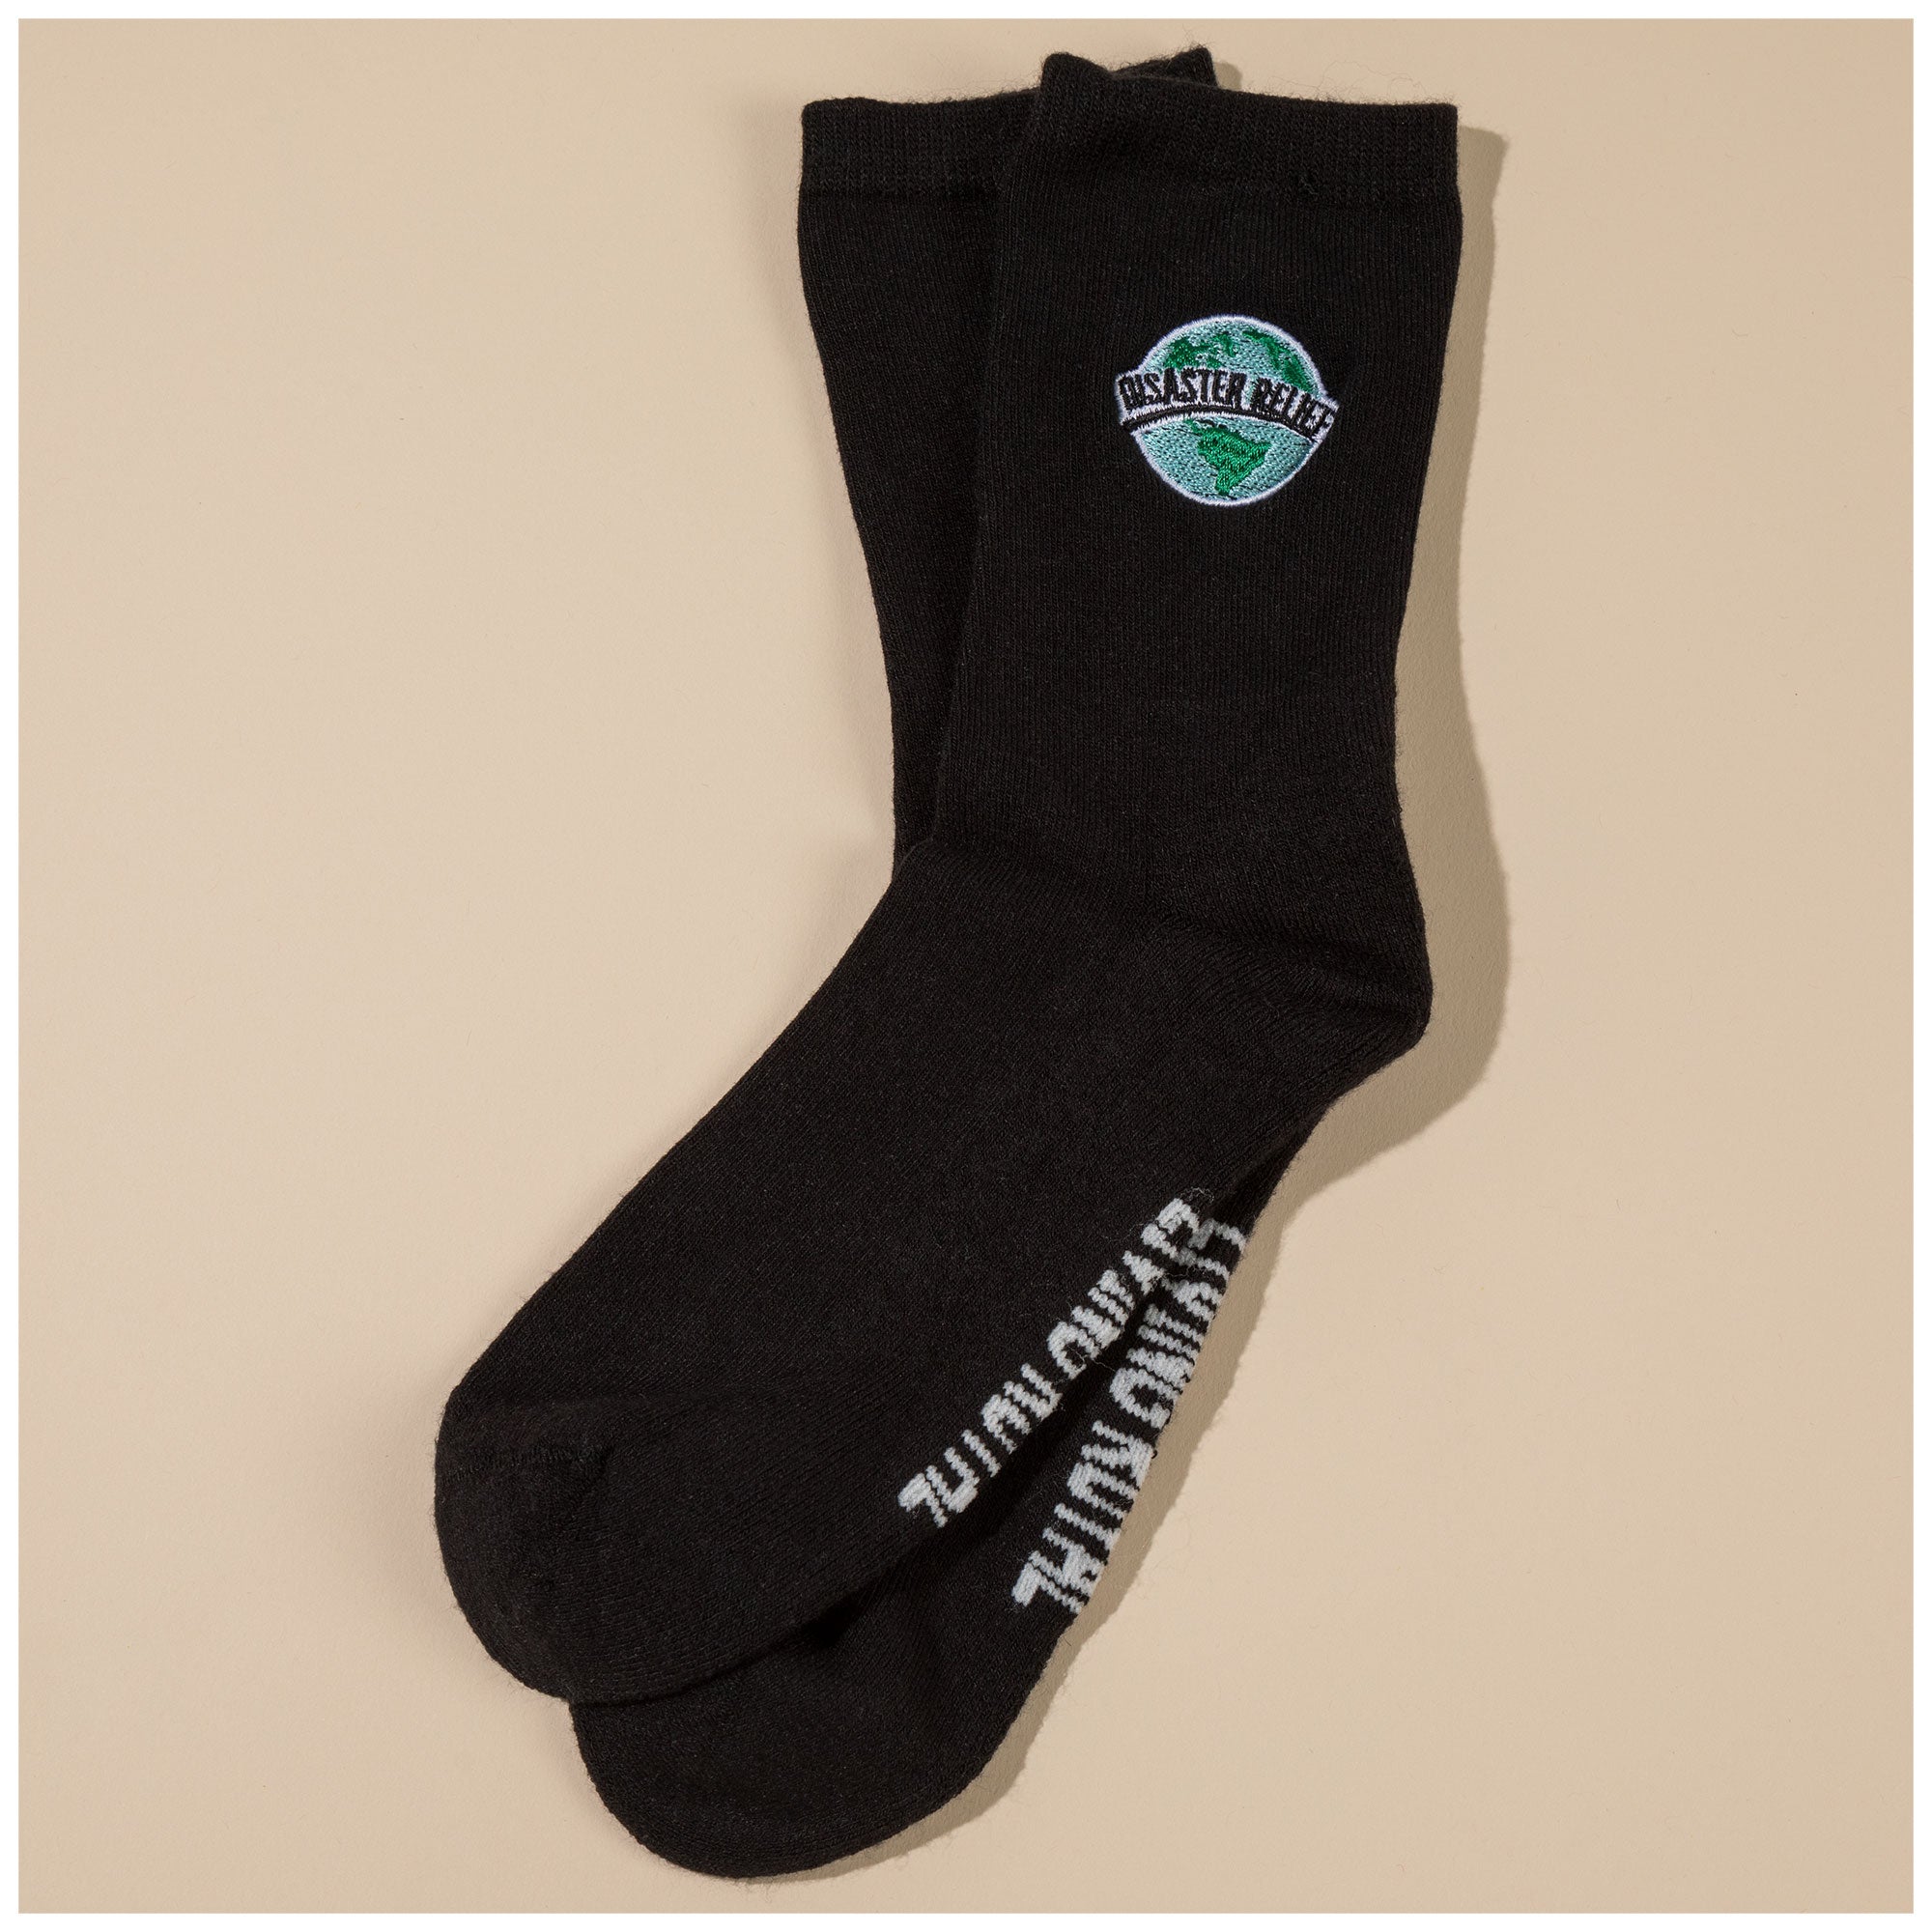 Living Royal Charity Crew Socks - Disaster Relief